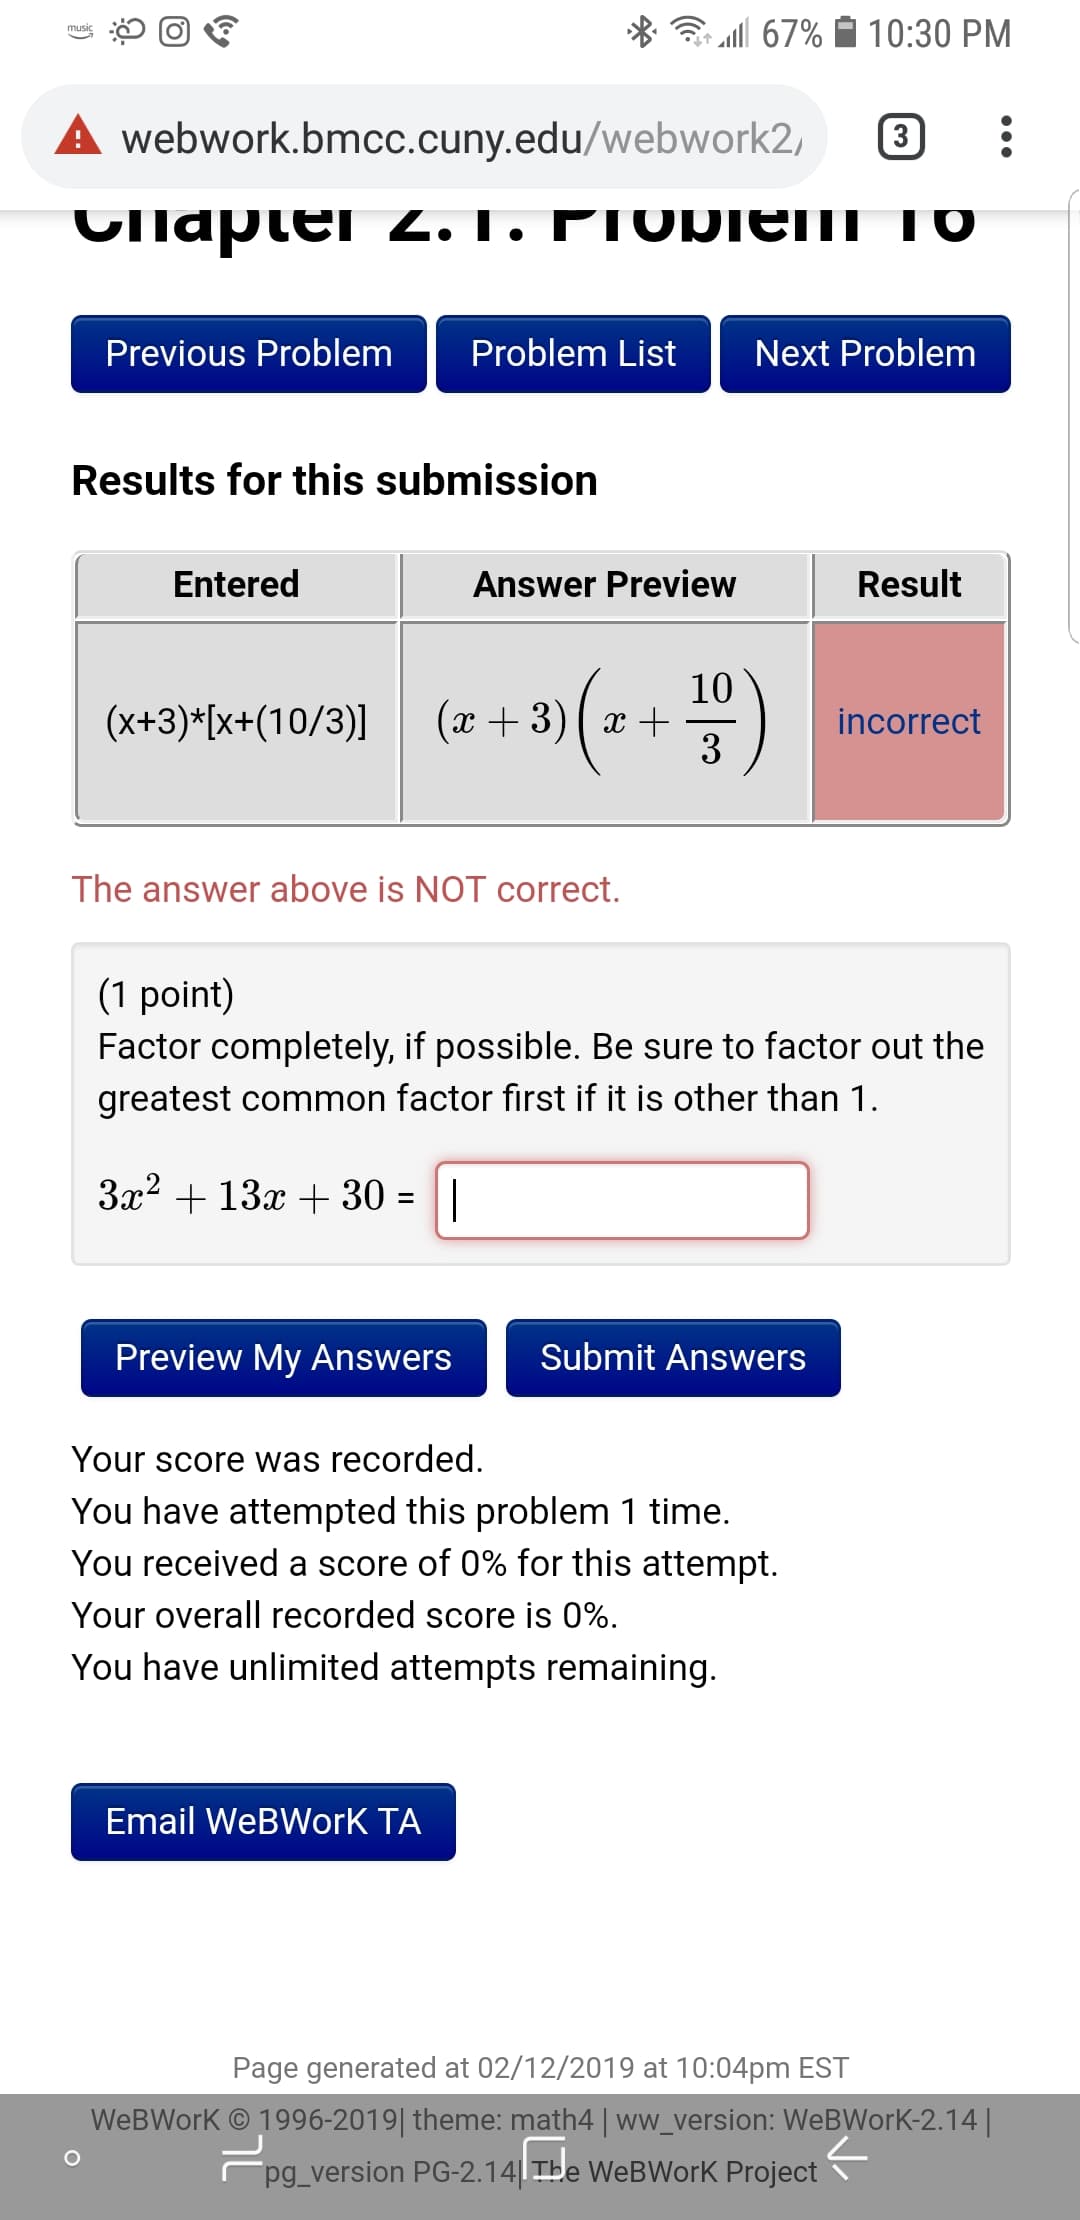 â. '11 67%
10:30 PM
A webwork.bmcc.cuny.edu/webwork2, 3
Previous Problem
Problem List
Next Problem
Results for this submission
Entered
Answer Preview
Result
10
incorrect
The answer above is NOT correct.
(1 point)
Factor completely, if possible. Be sure to factor out the
greatest common factor first if it is other than 1
Preview My Answers
Submit Answers
Your score was recorded
You have attempted this problem 1 time.
You received a score of 0% for this attempt.
Your overall recorded score is 0%
You have unlimited attempts remaining
Email WeBWorK TA
Page generated at 02/12/2019 at 10:04pm EST
WeBWork 1996-2019 theme: math4 ww_version: WeBWork-2.14
pg_version PG-2.14 TBe WeBWorK Project
